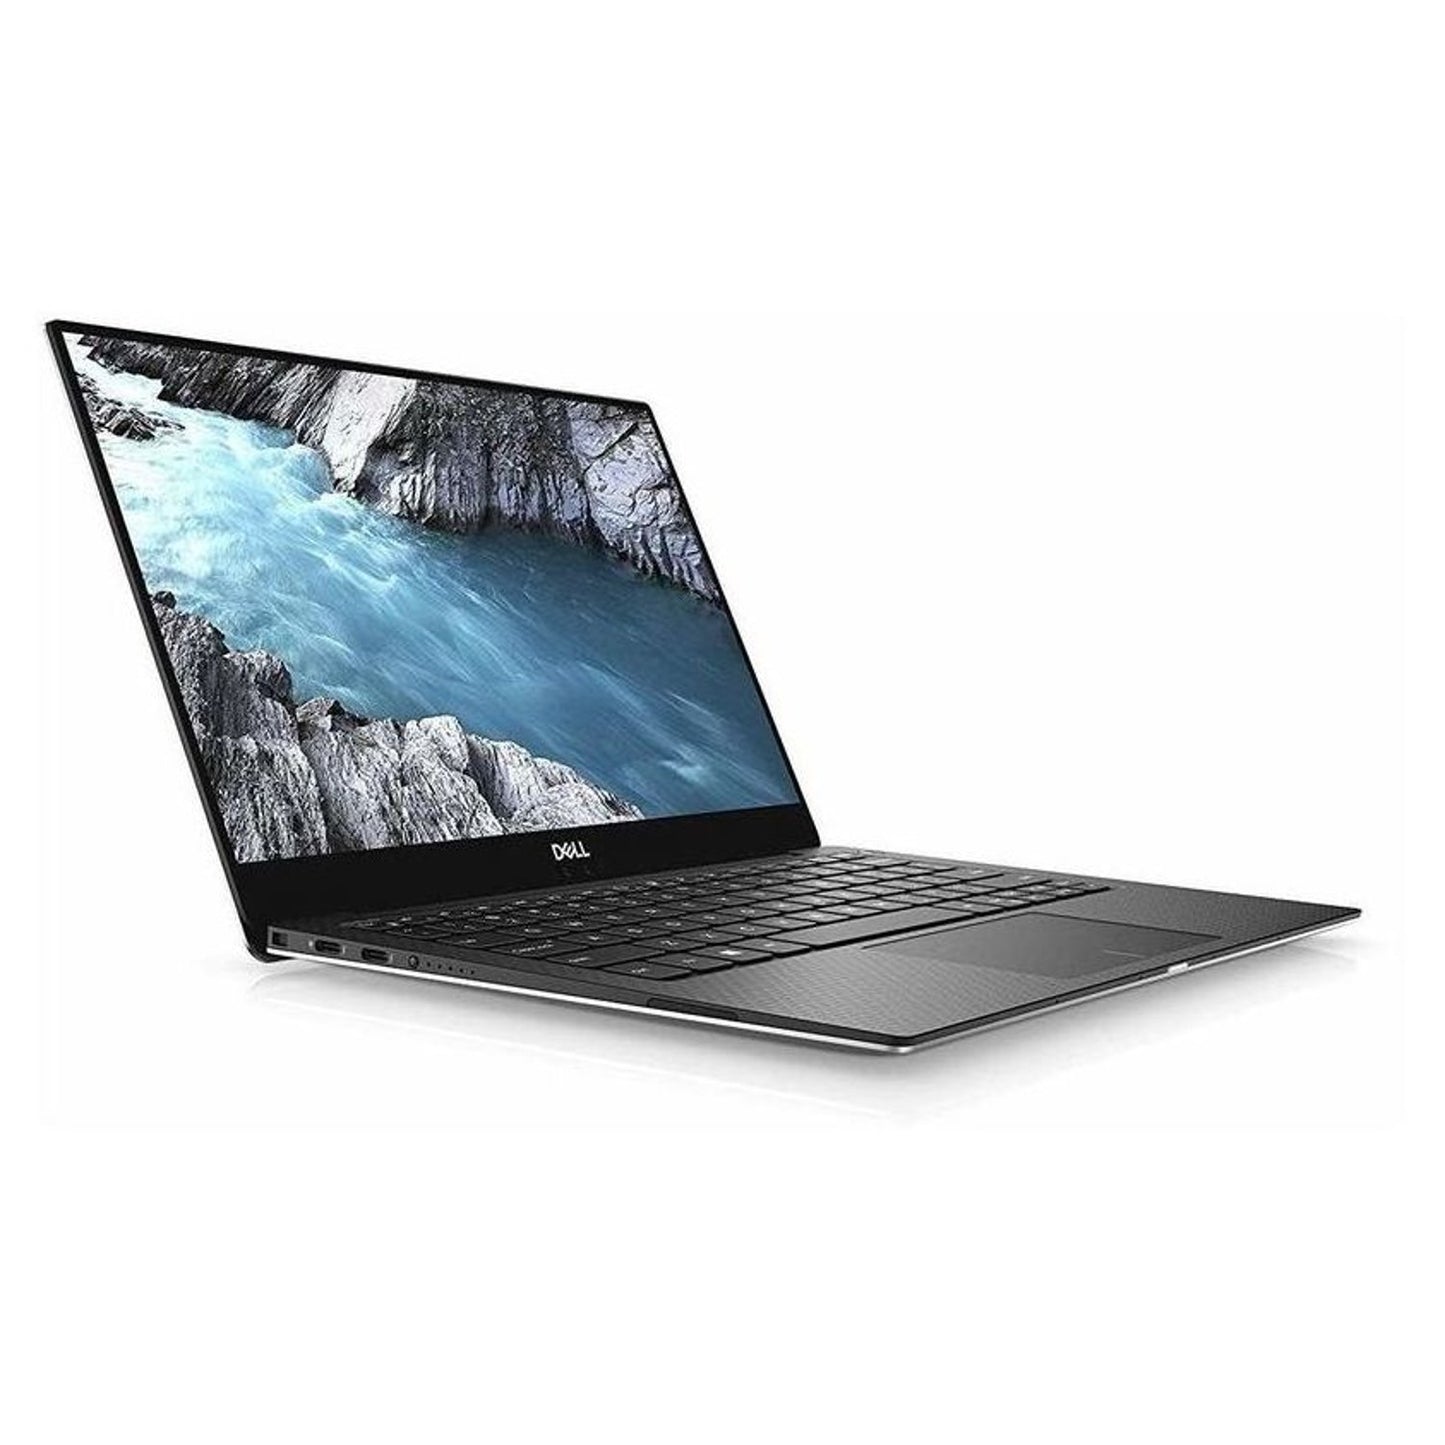 Dell XPS 13 7390 - (Non-Touch)